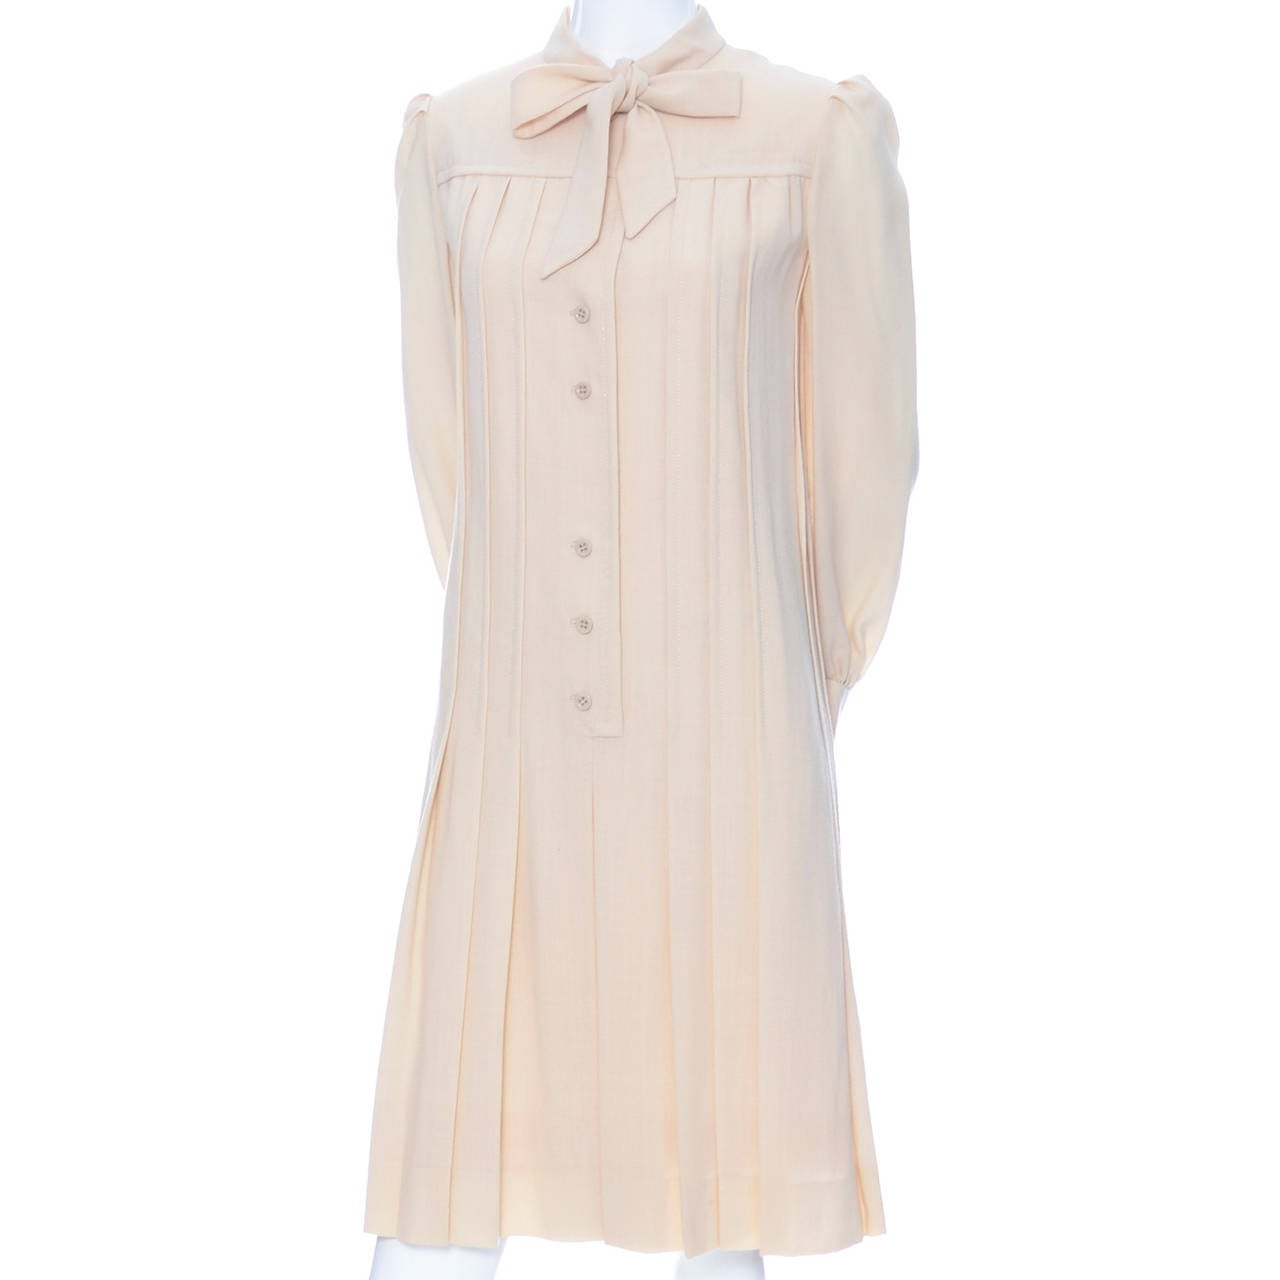 Women's 1970s Vintage Dress Marshall Field France in Cream Pleated Wool With Bow